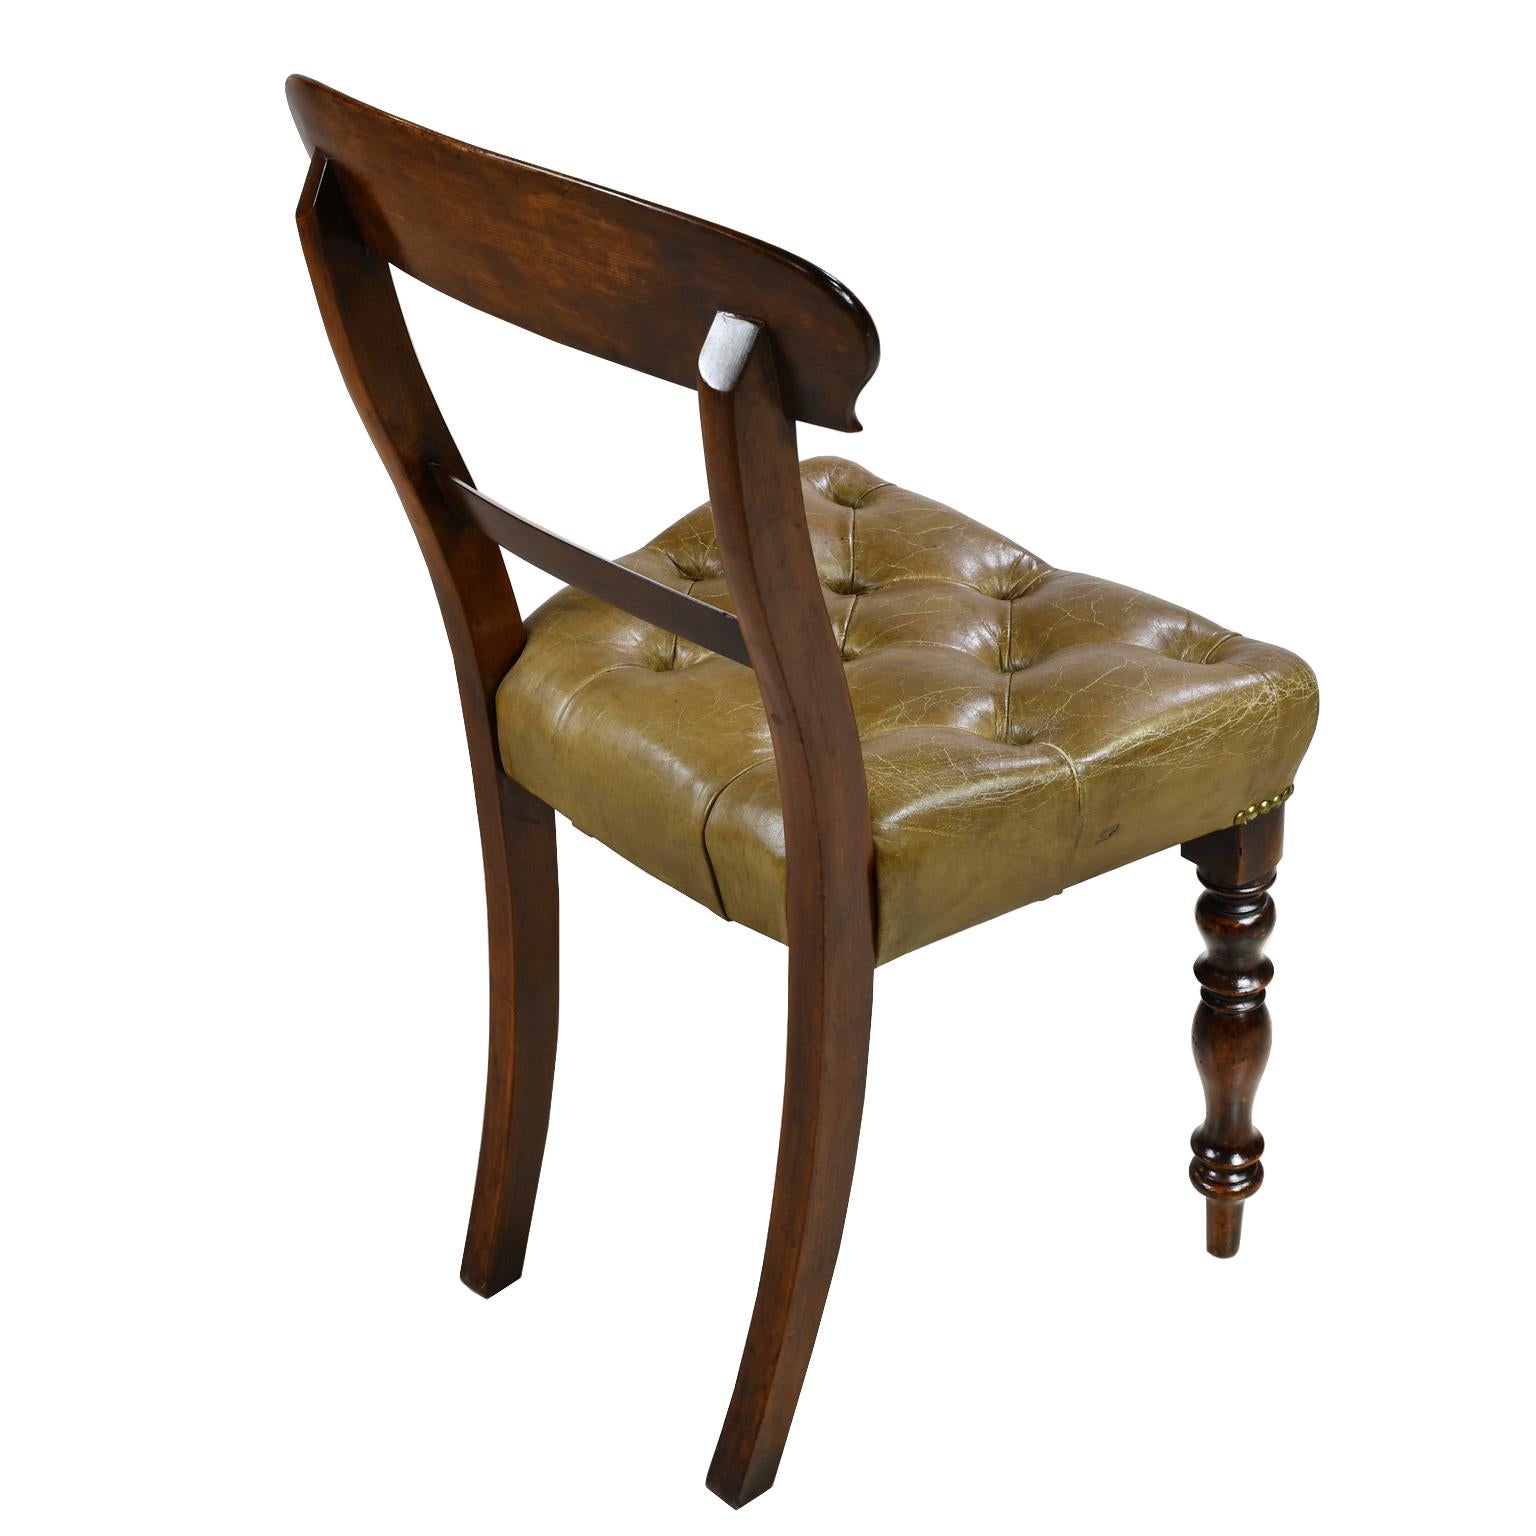 Mid-19th Century Early Victorian Mahogany Chair with Tufted Leather Upholstery, England For Sale